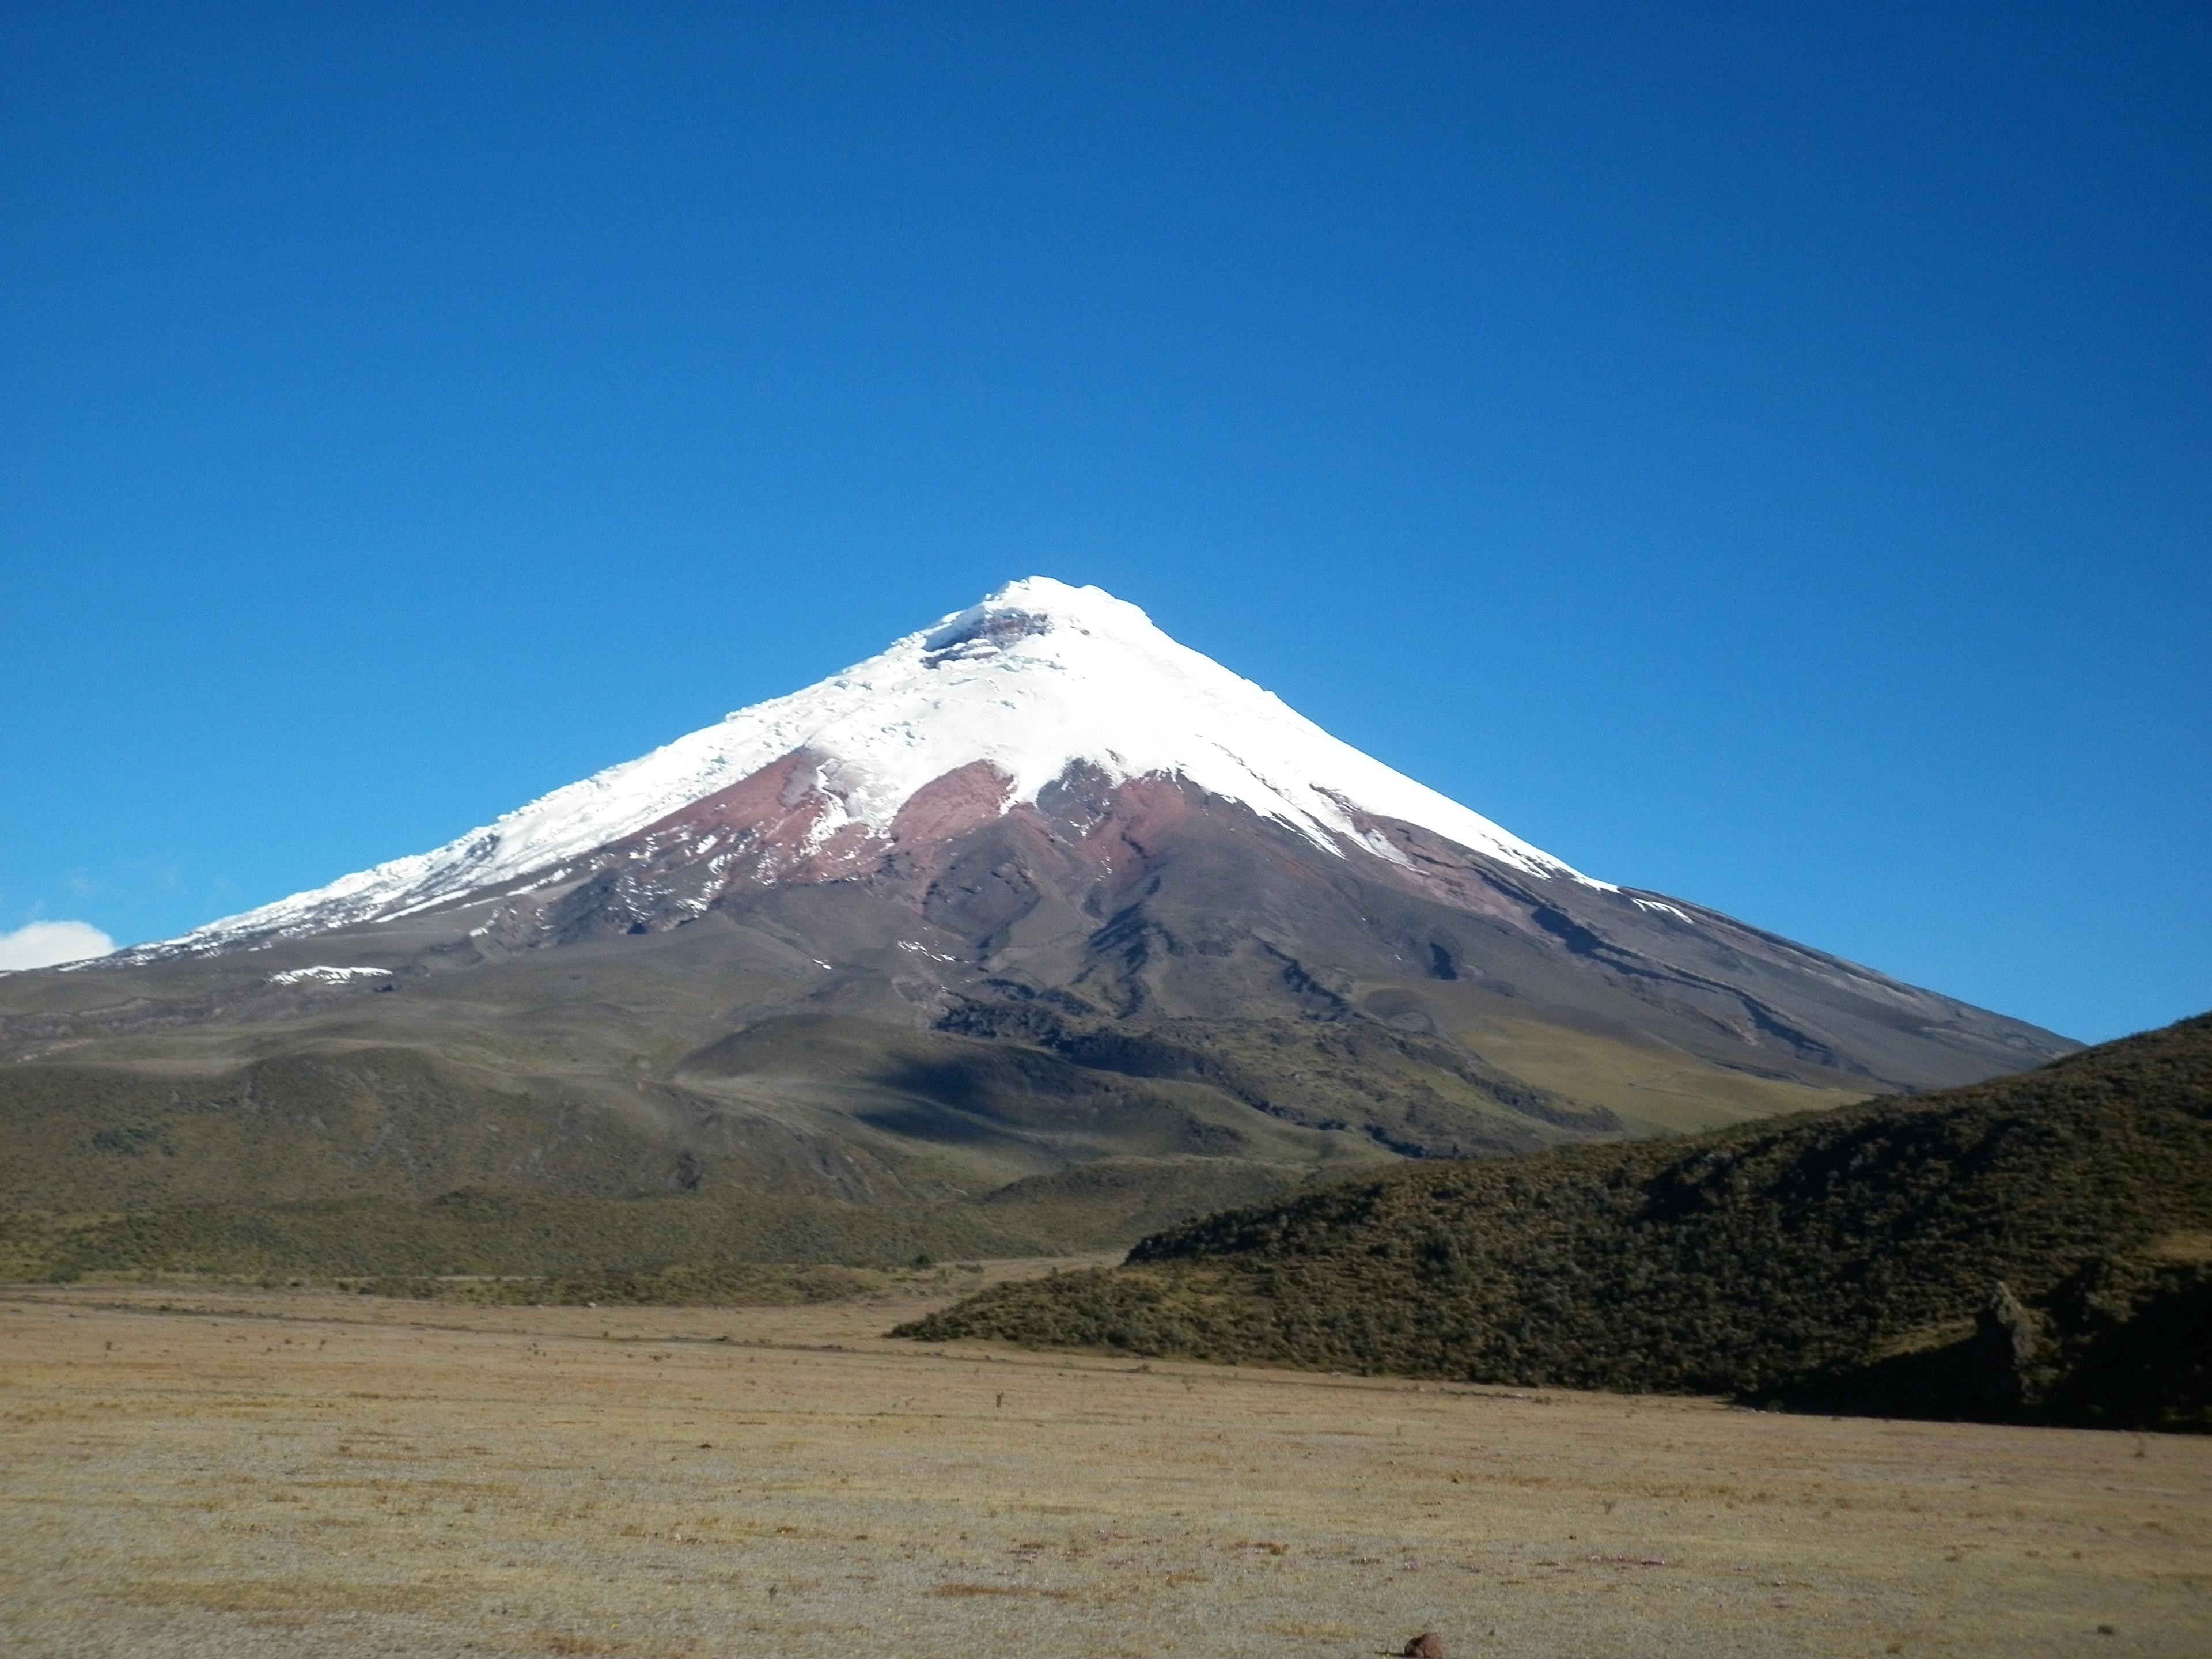 Cover image of this place Cotopaxi National Park 